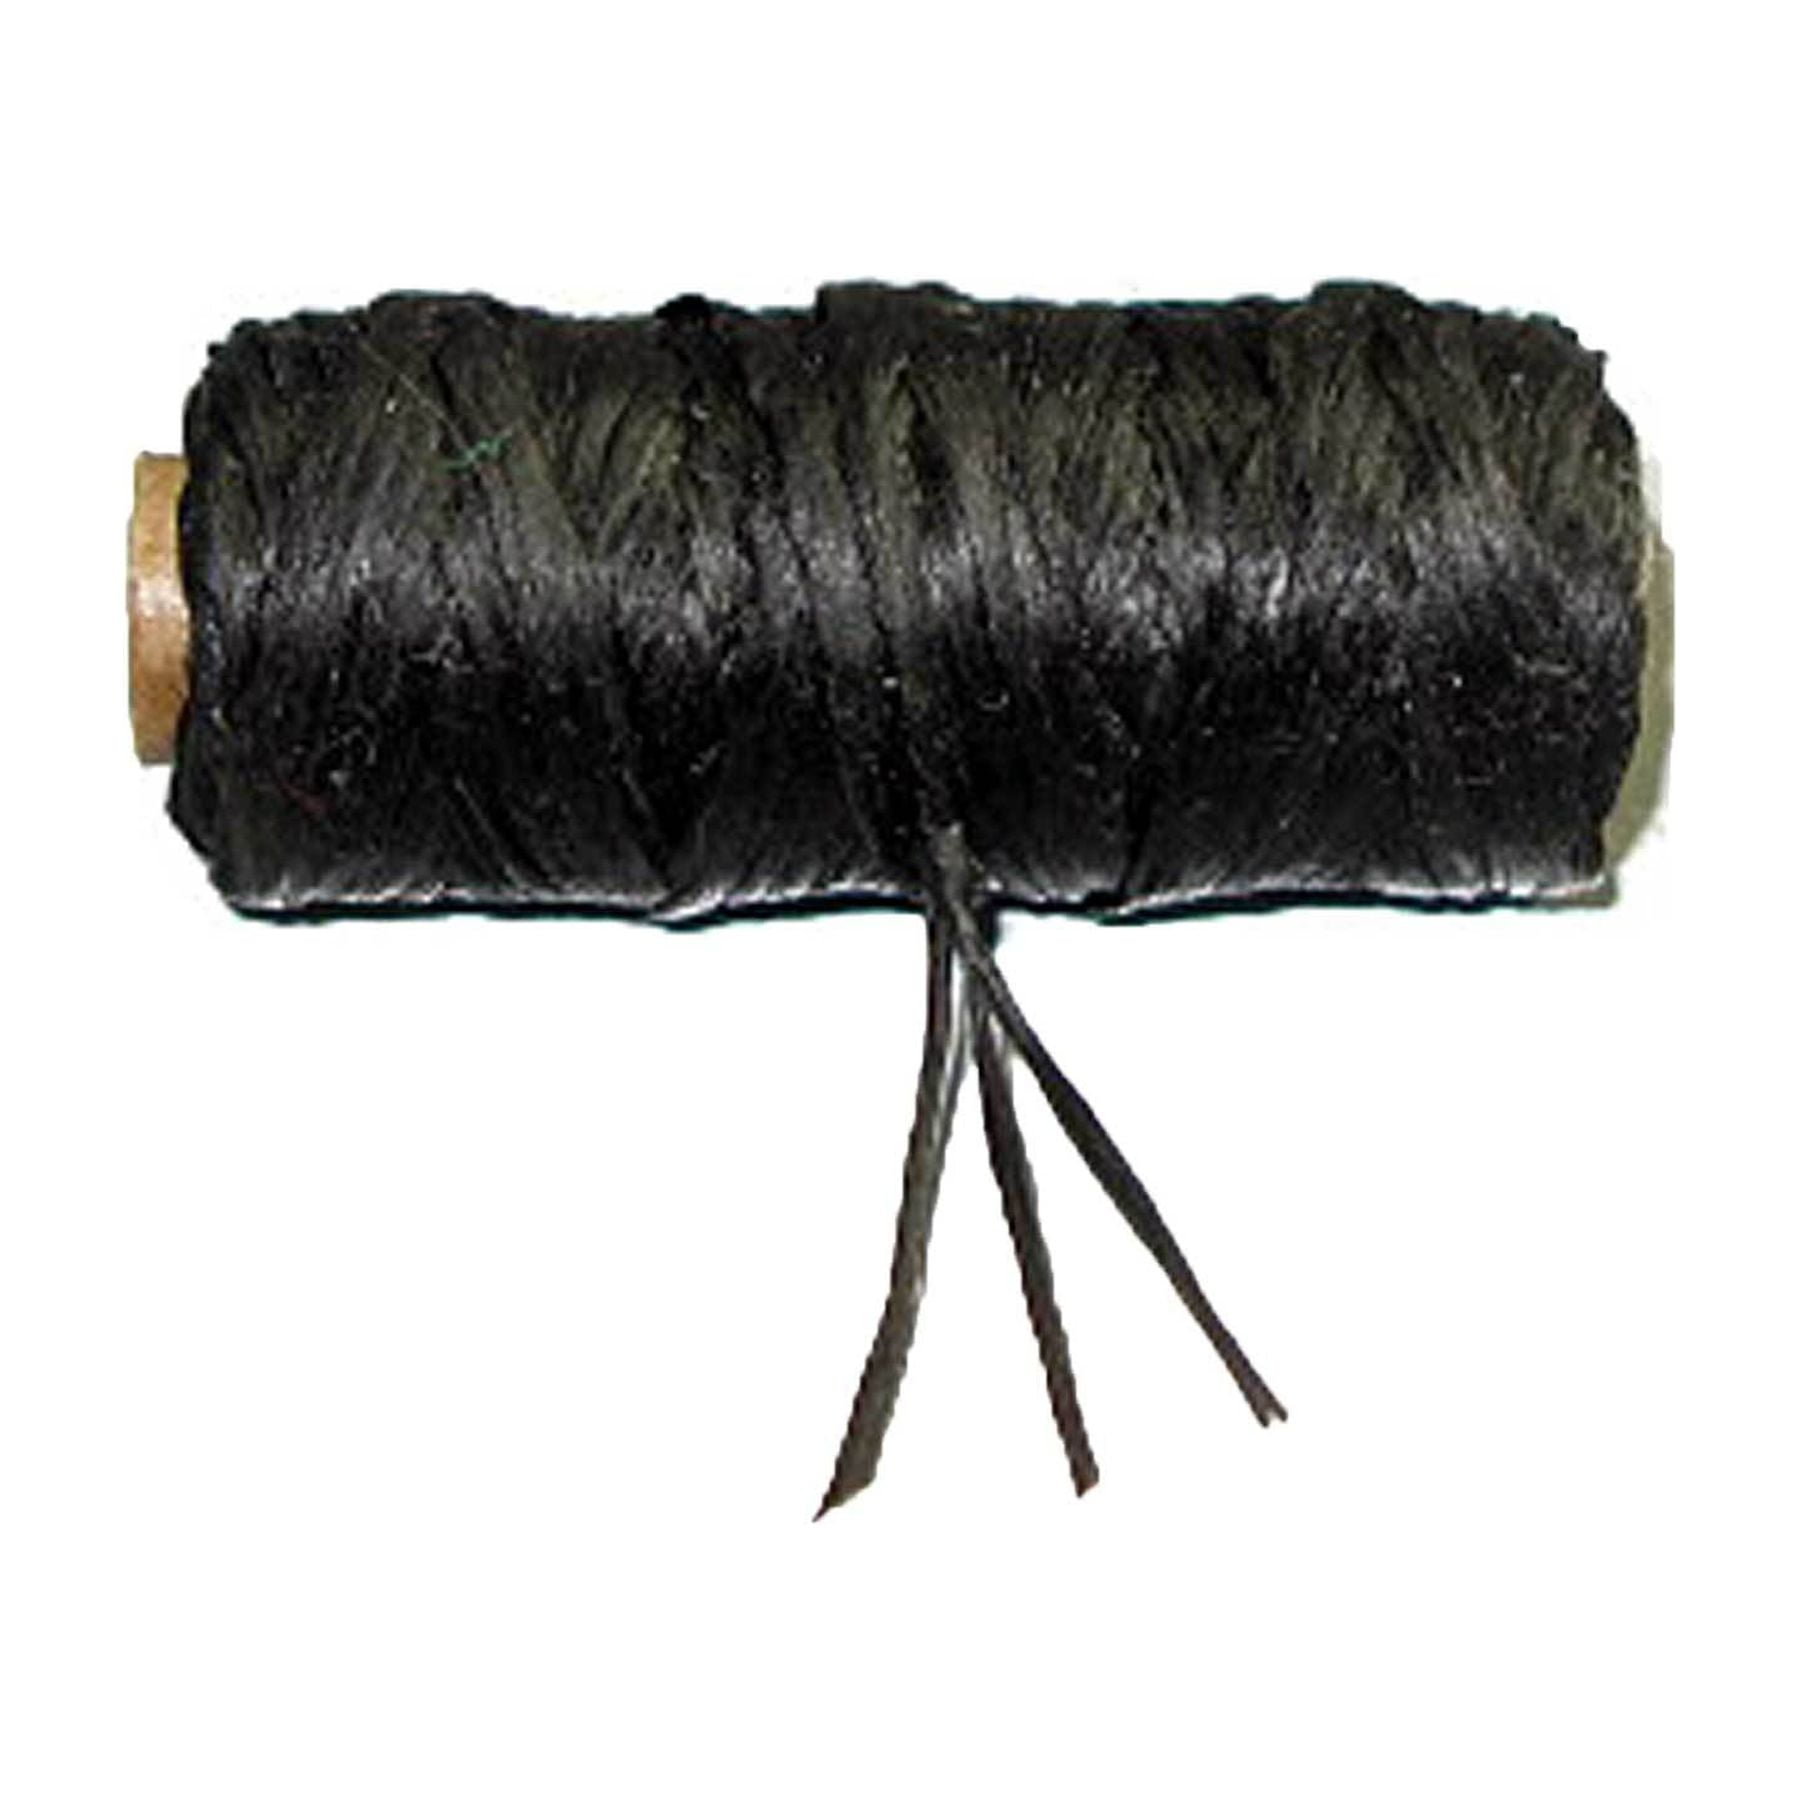 Artificial Sinew 20 Yds (18.3 m) — Tandy Leather International